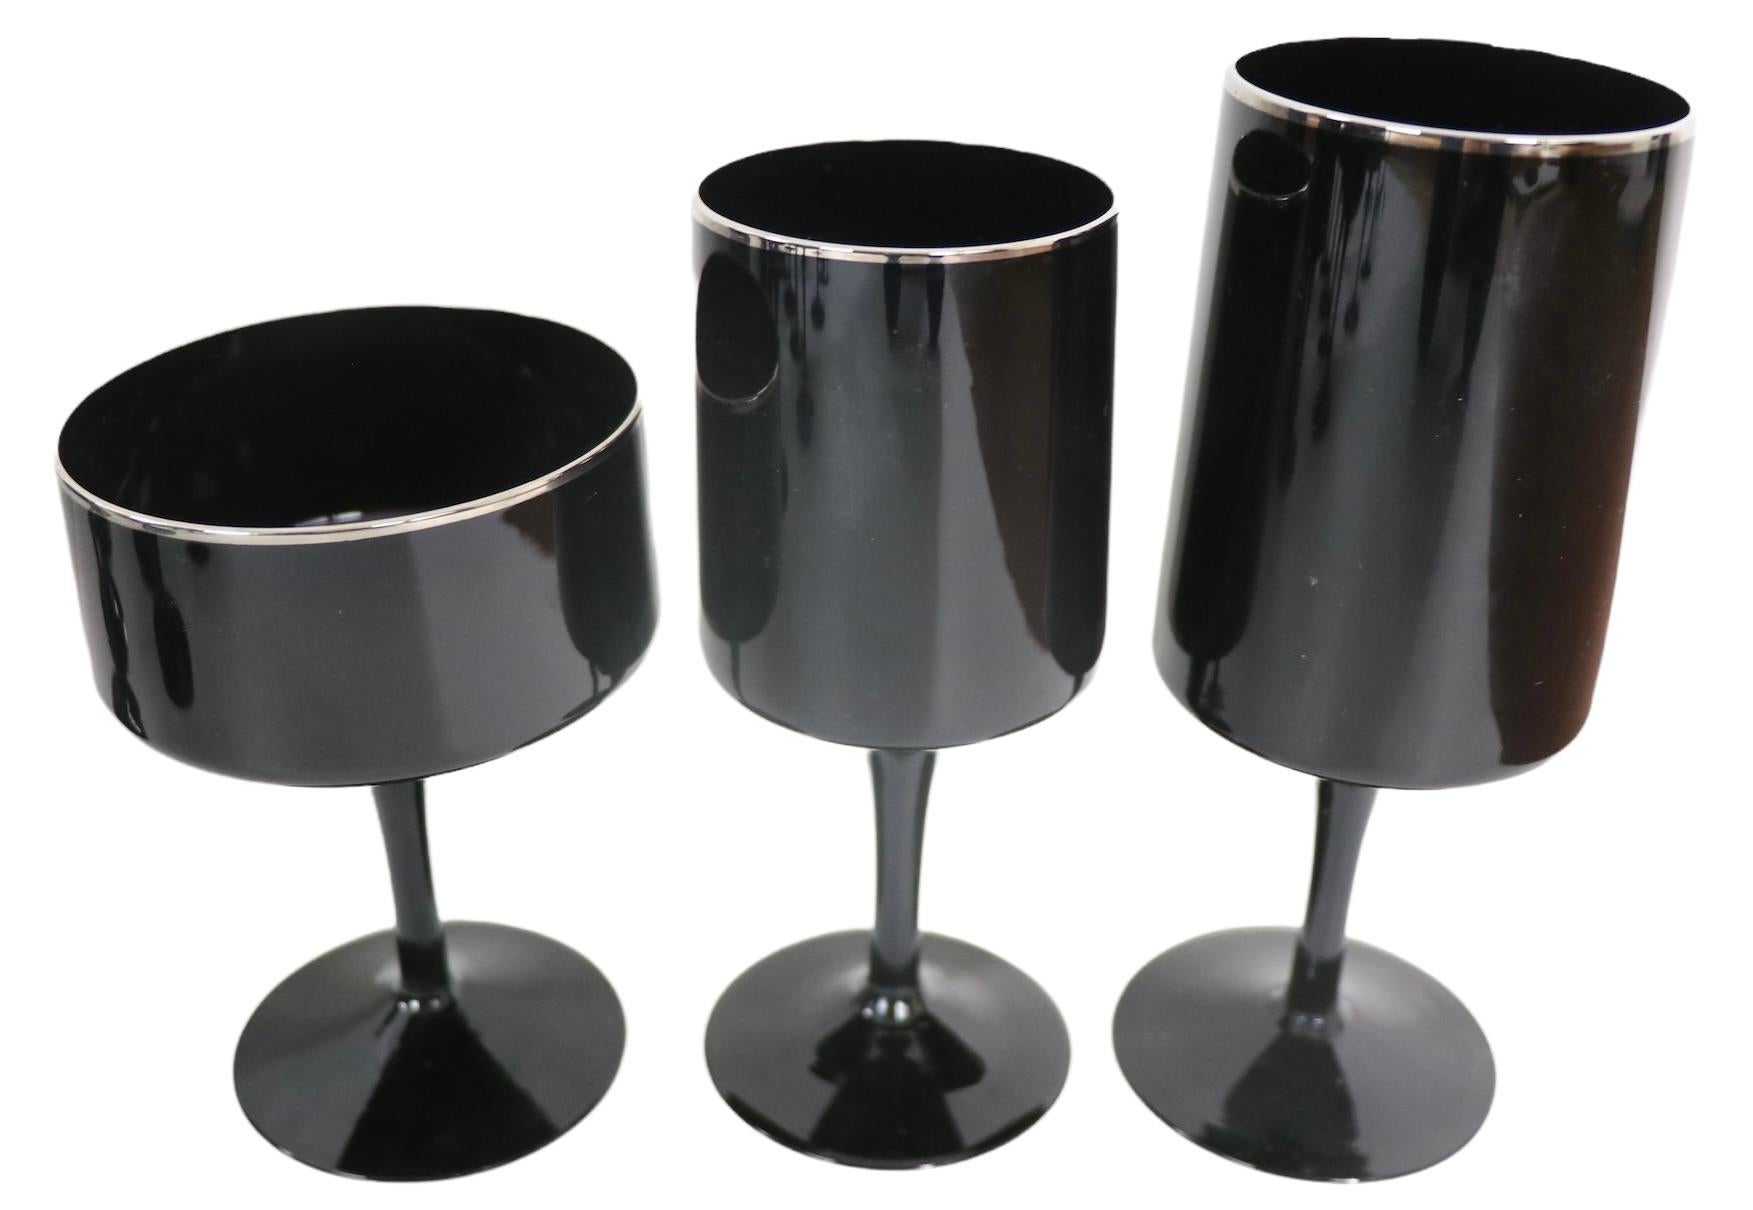 Exceptional large set of stemware by noted maker Lenox, in the Venture pattern. The glasses are black glass with platinum band trim at the top rim. The set consists of three sizes as follows:
 10 Saucer Champagne Glasses 5 H x 4 Dia.
 11 Wine